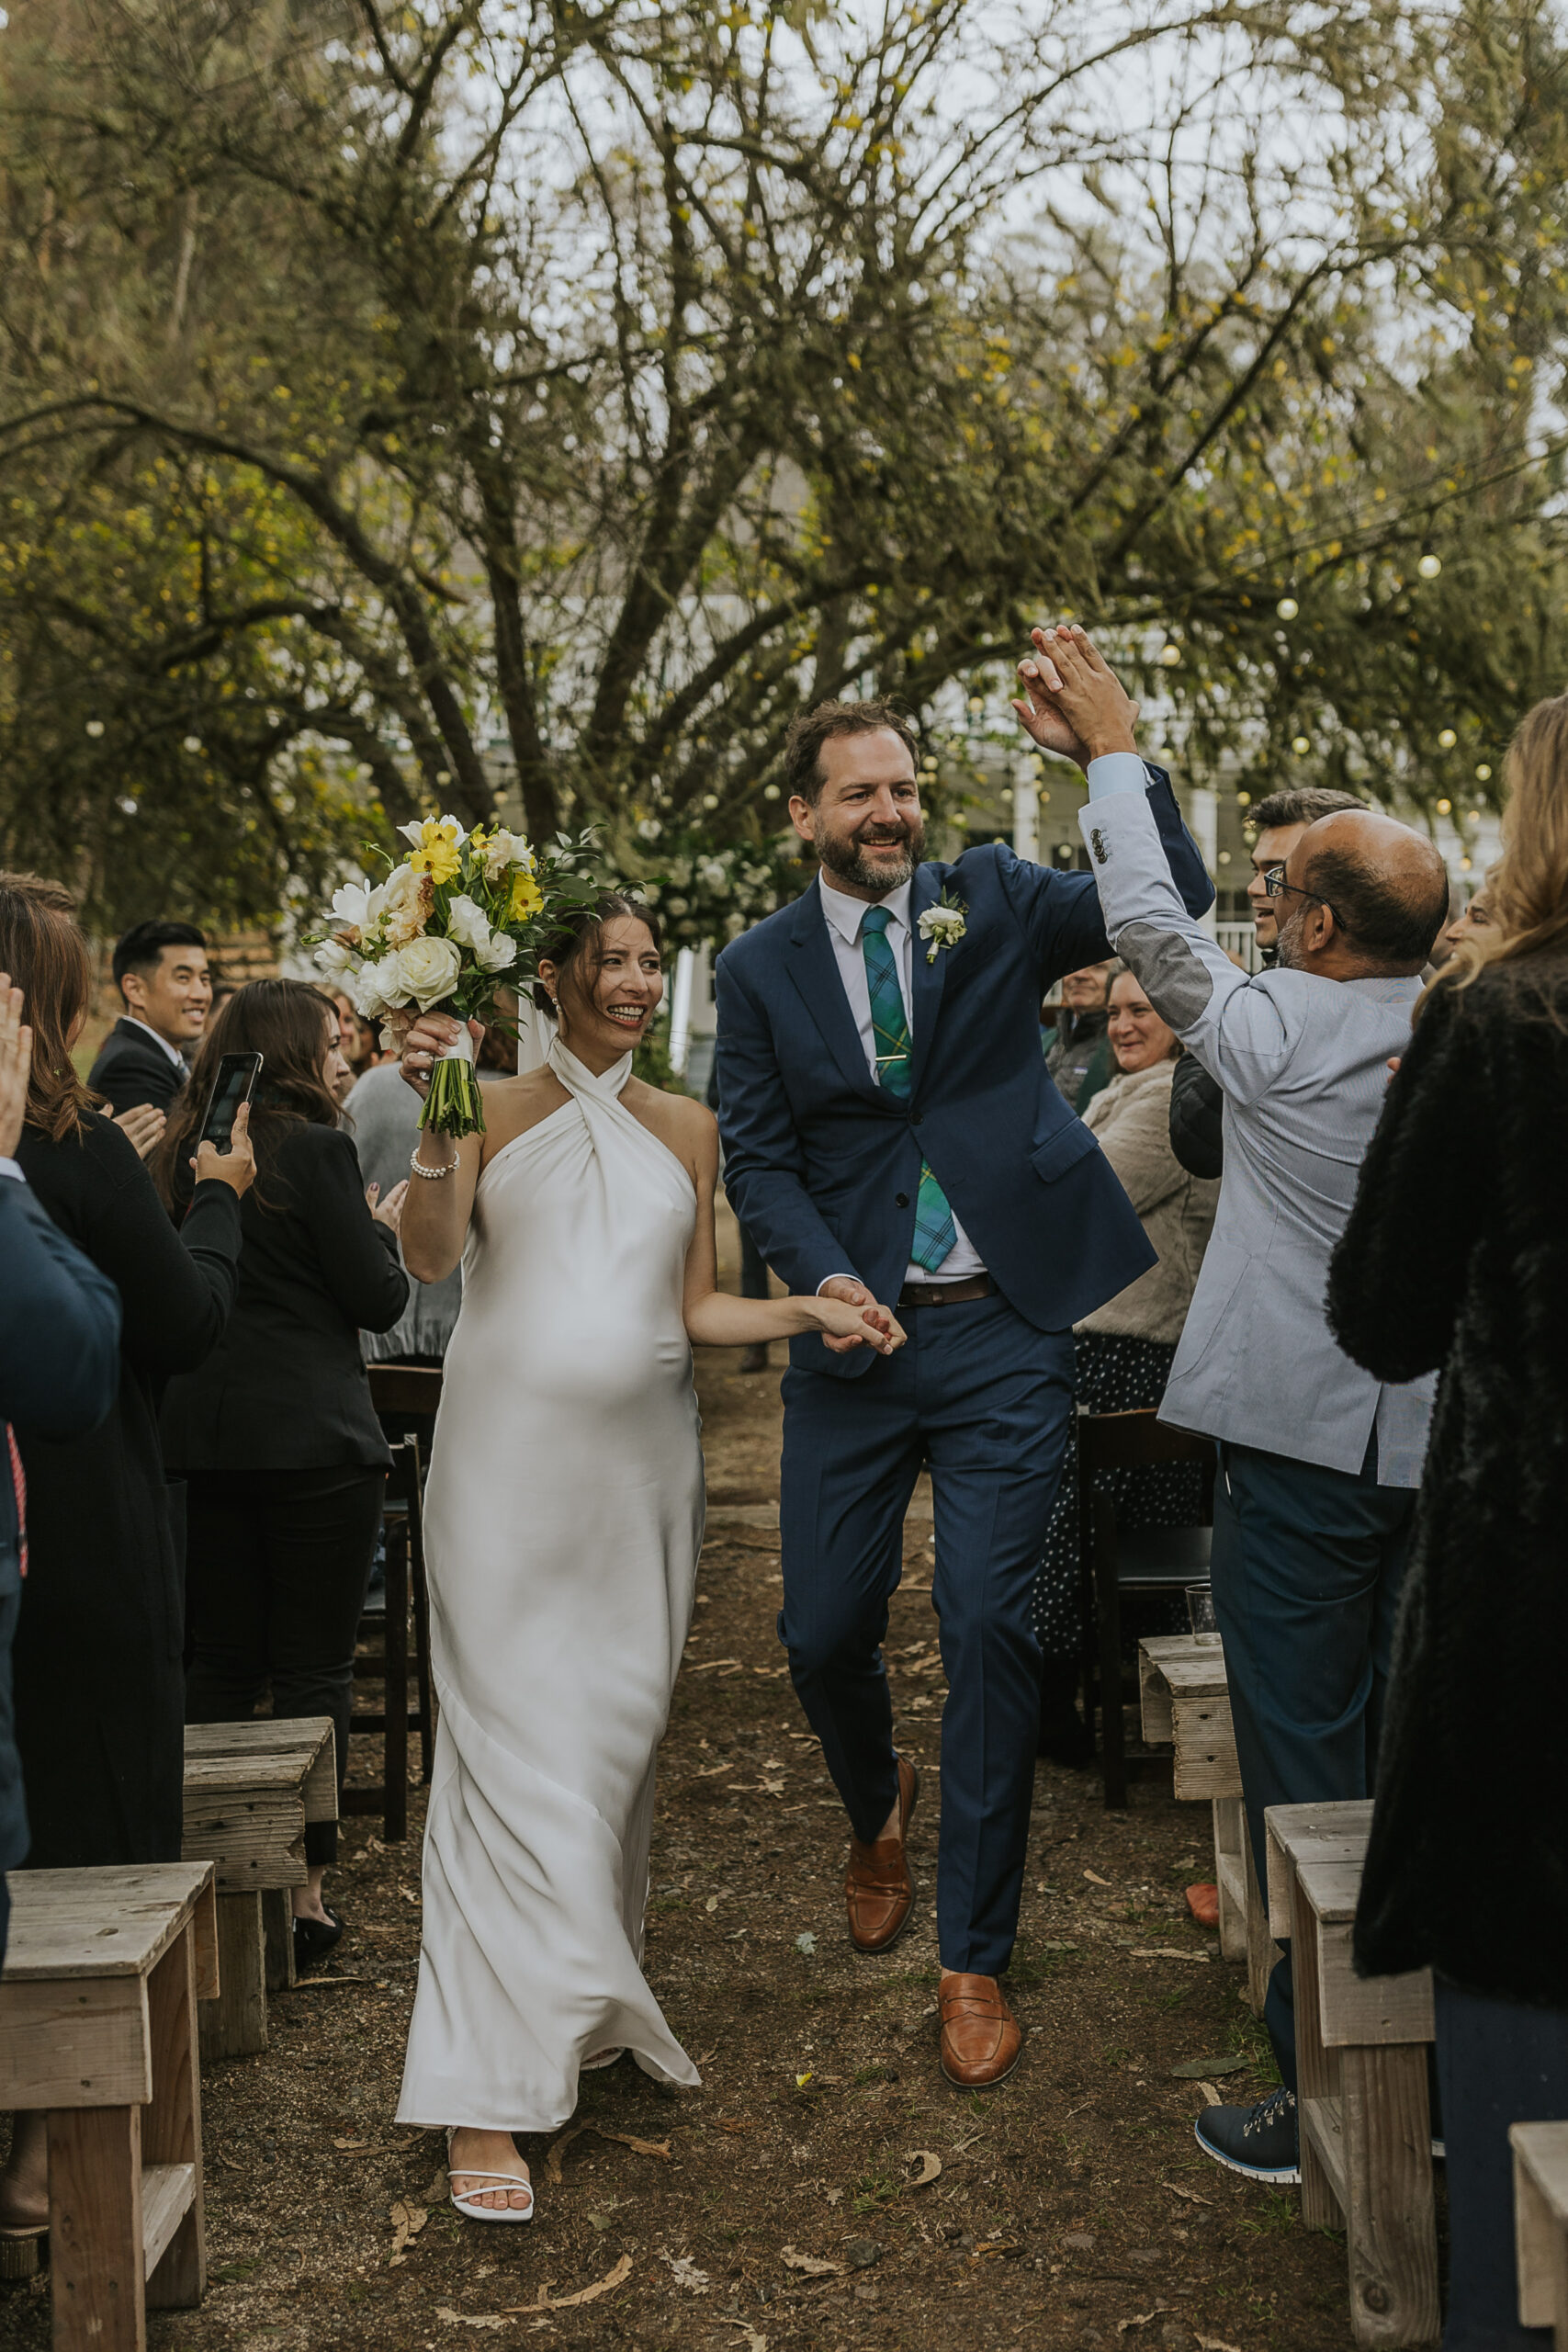 rebecca skidgel photography tomales sonoma county wedding photographer straus home ranch ceremony bride groom just married